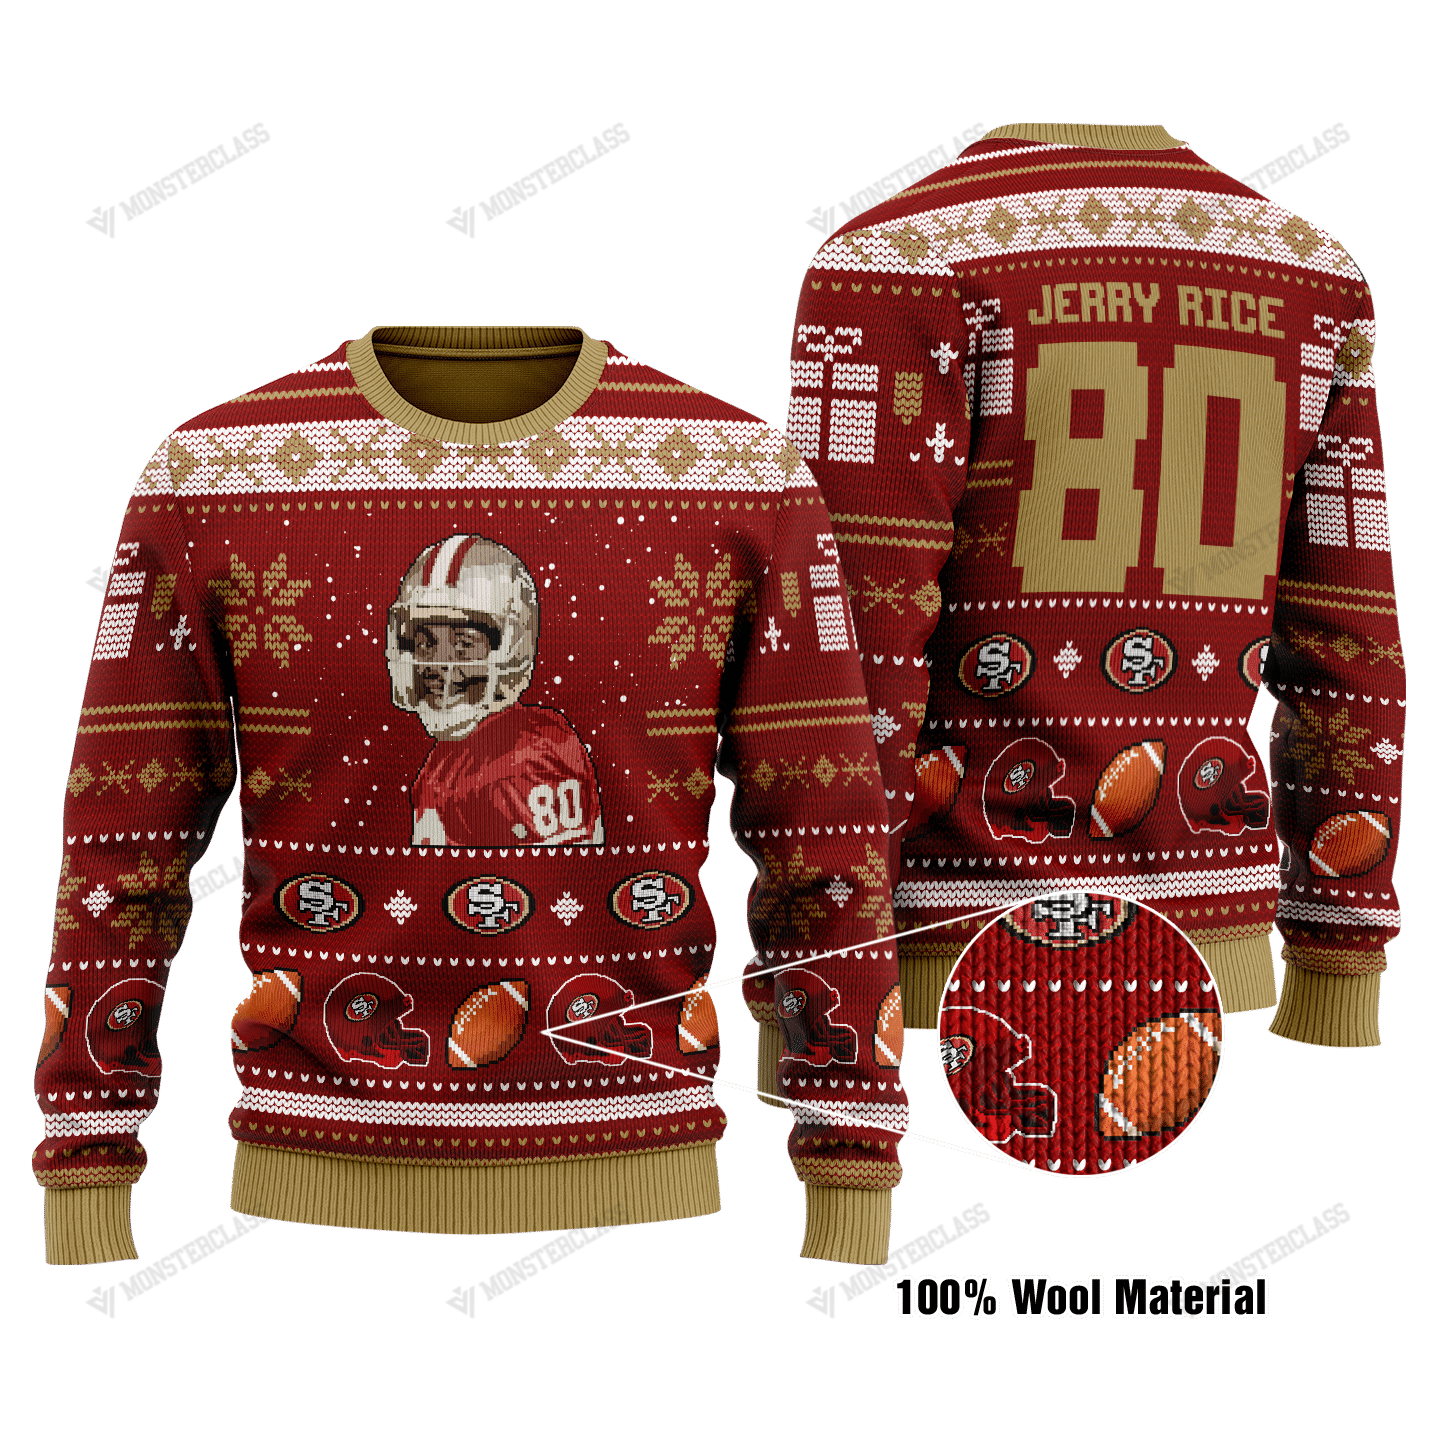 Jerry Rice 80 San Francisco 49ers NFL christmas sweater